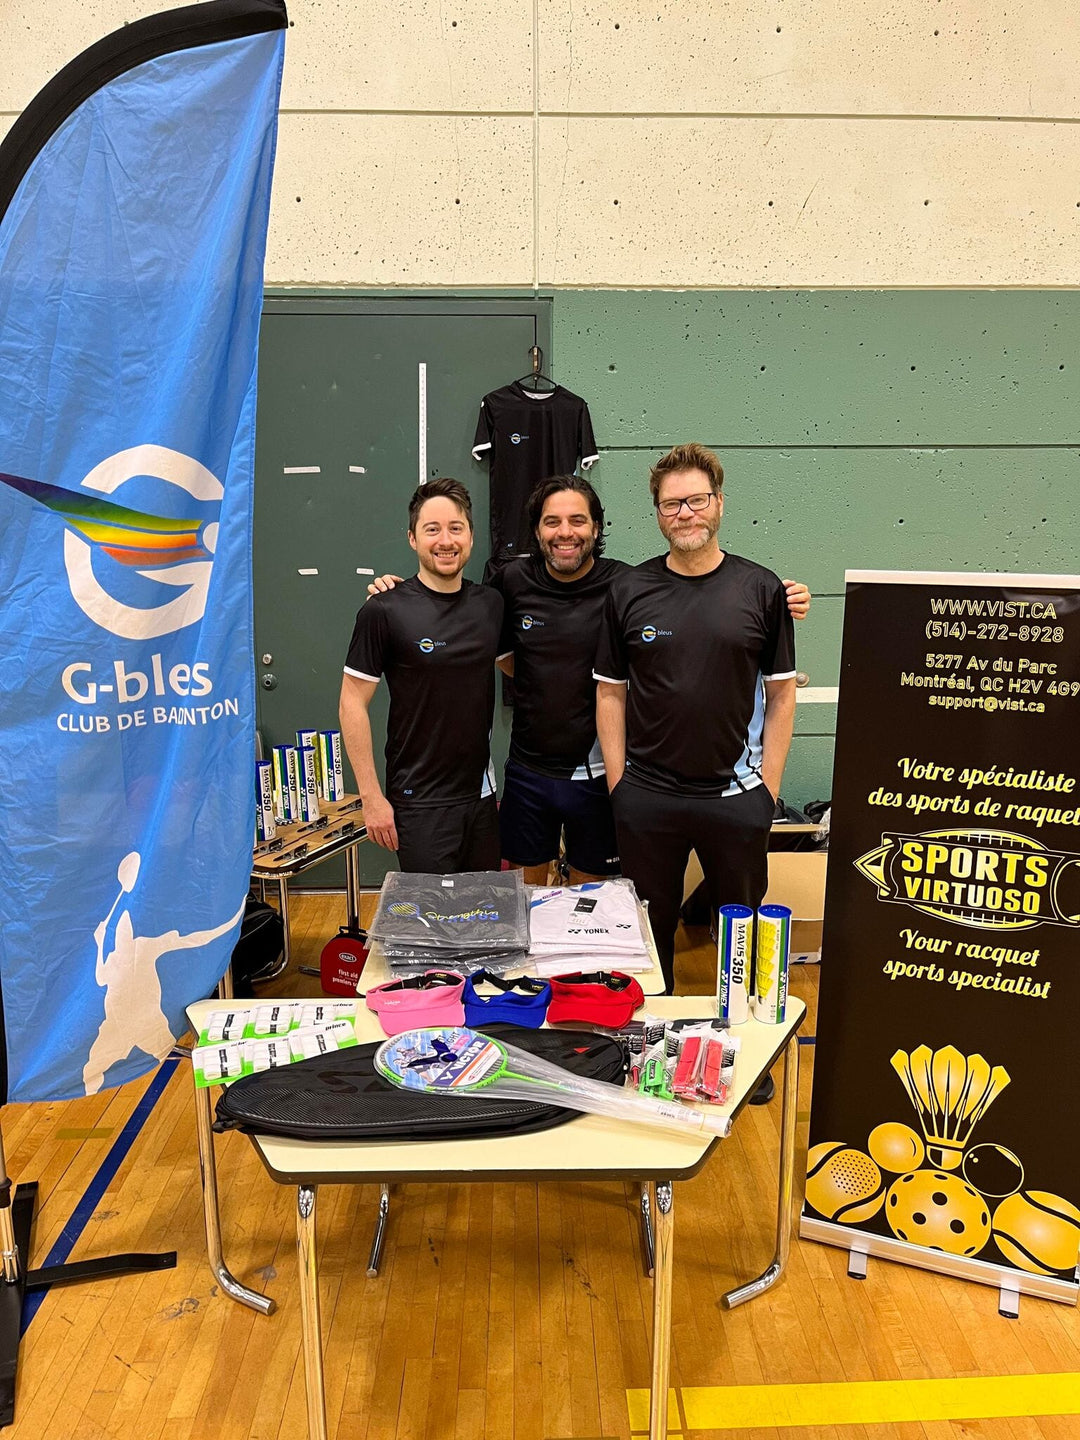 Partnership with the Montreal badminton club G-Blues.